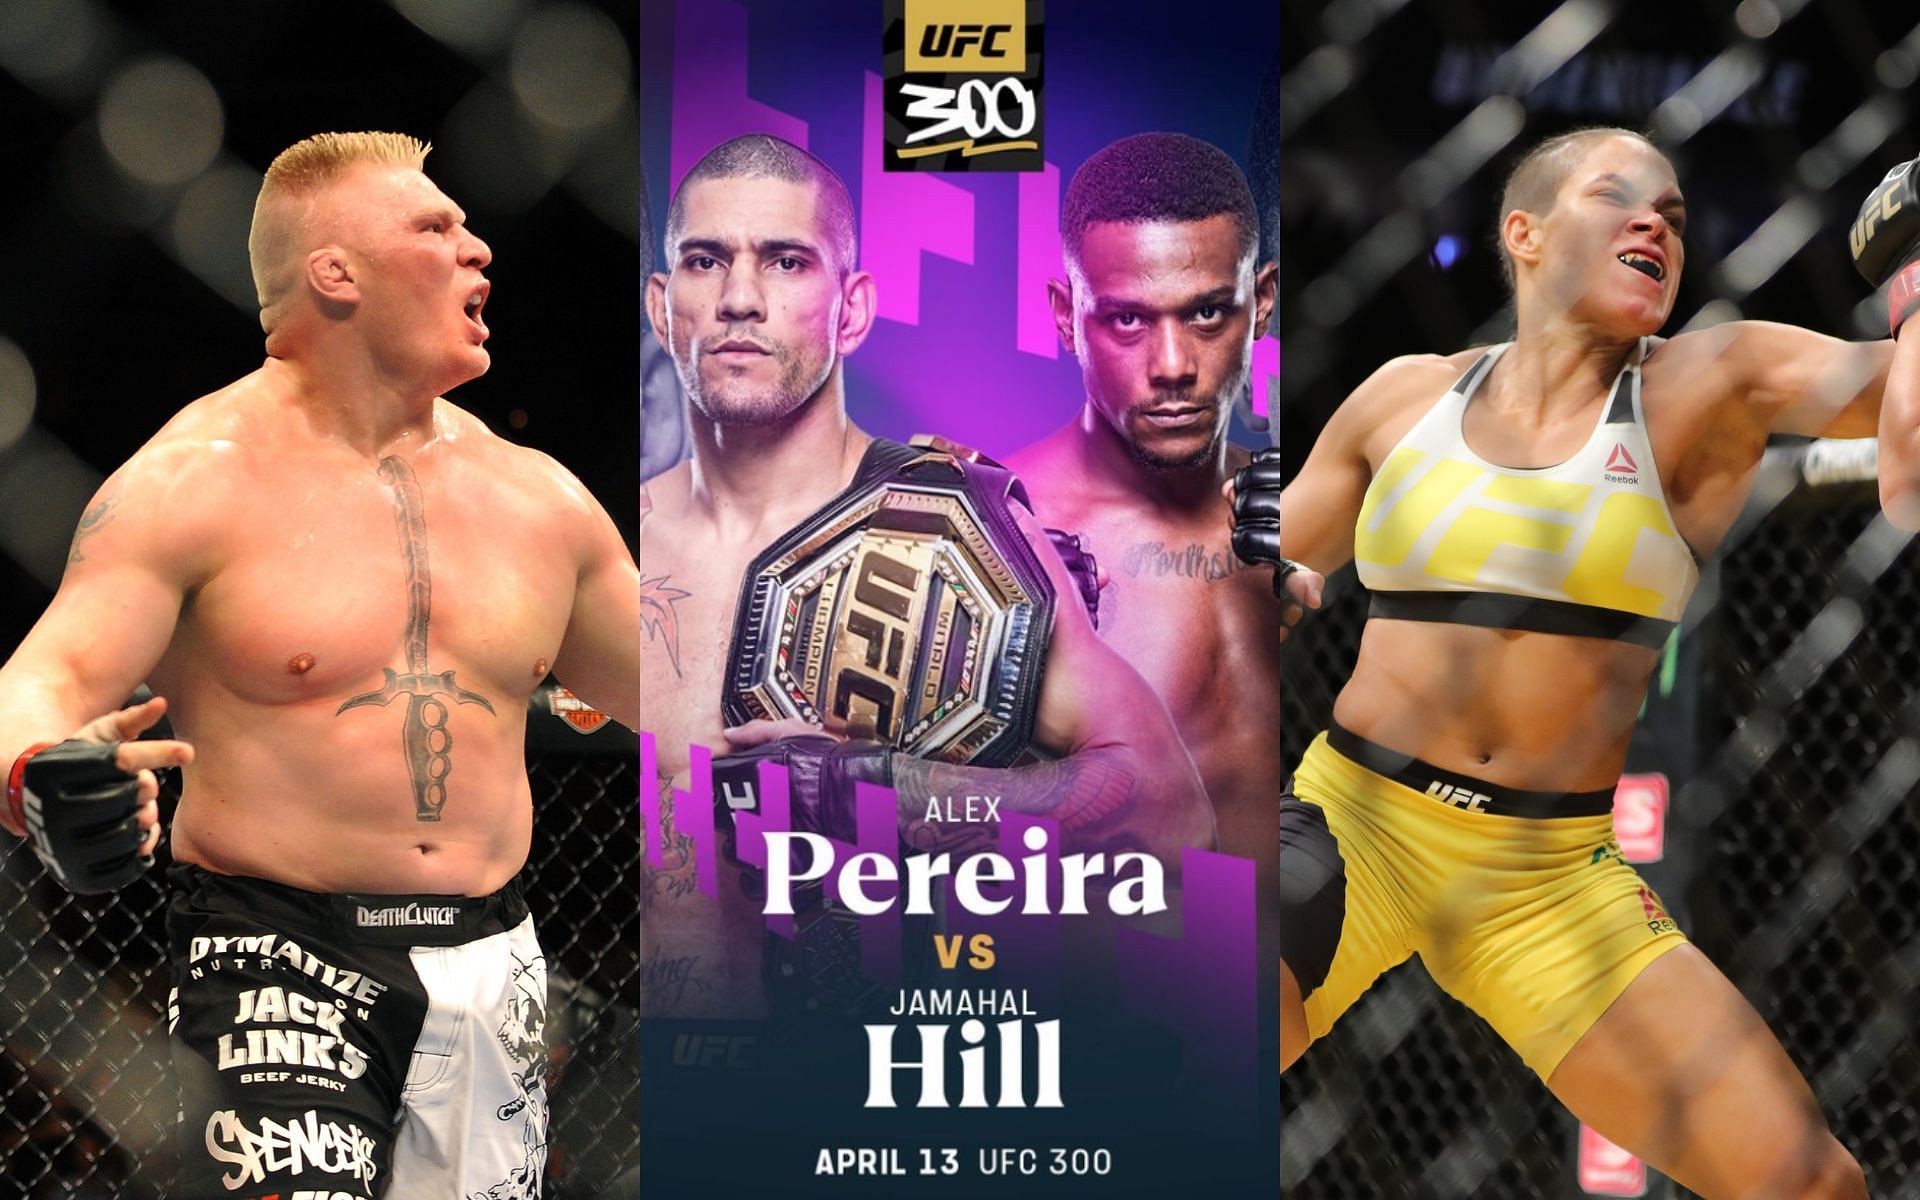 Brock Lesnar (left) and Amanda Nunes (right) emerged victorious in the headlining matchups of UFC 100 and UFC 200 respectively; whereas Alex Pereira and Jamahal Hill (middle) will fight for glory in the headliner of the UFC 300 event [Images courtesy: left and right images via Getty Images; middle image via @ufcontnt on X]